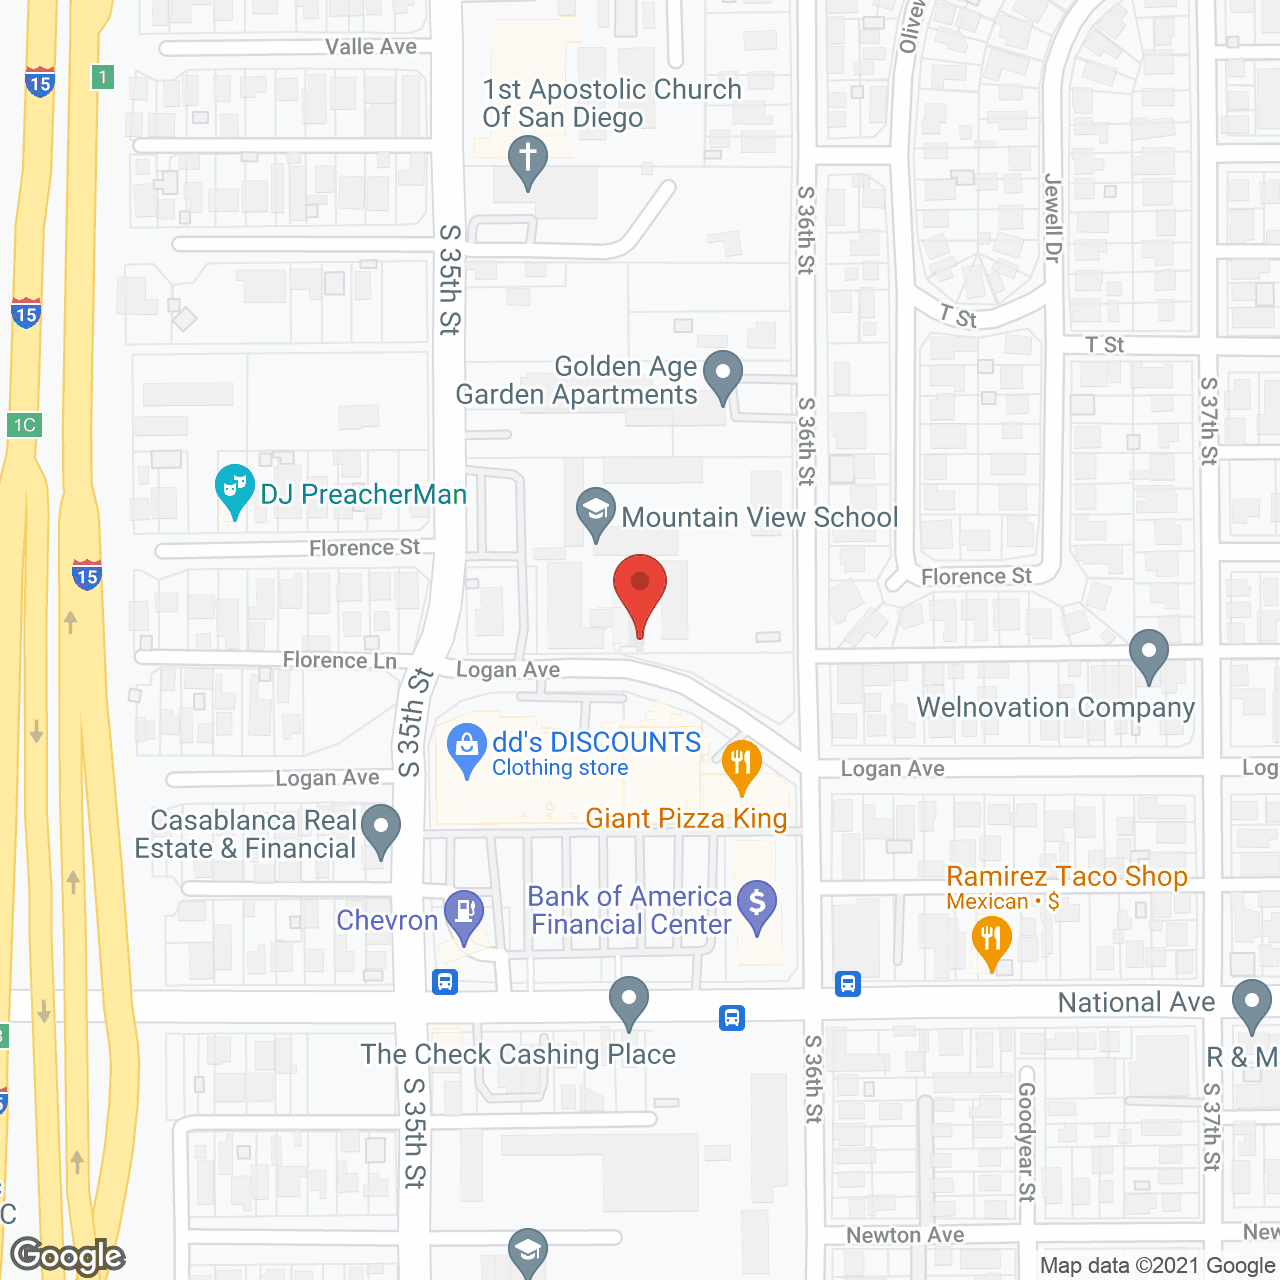 AAA Home Care Services - San Diego, CA in google map